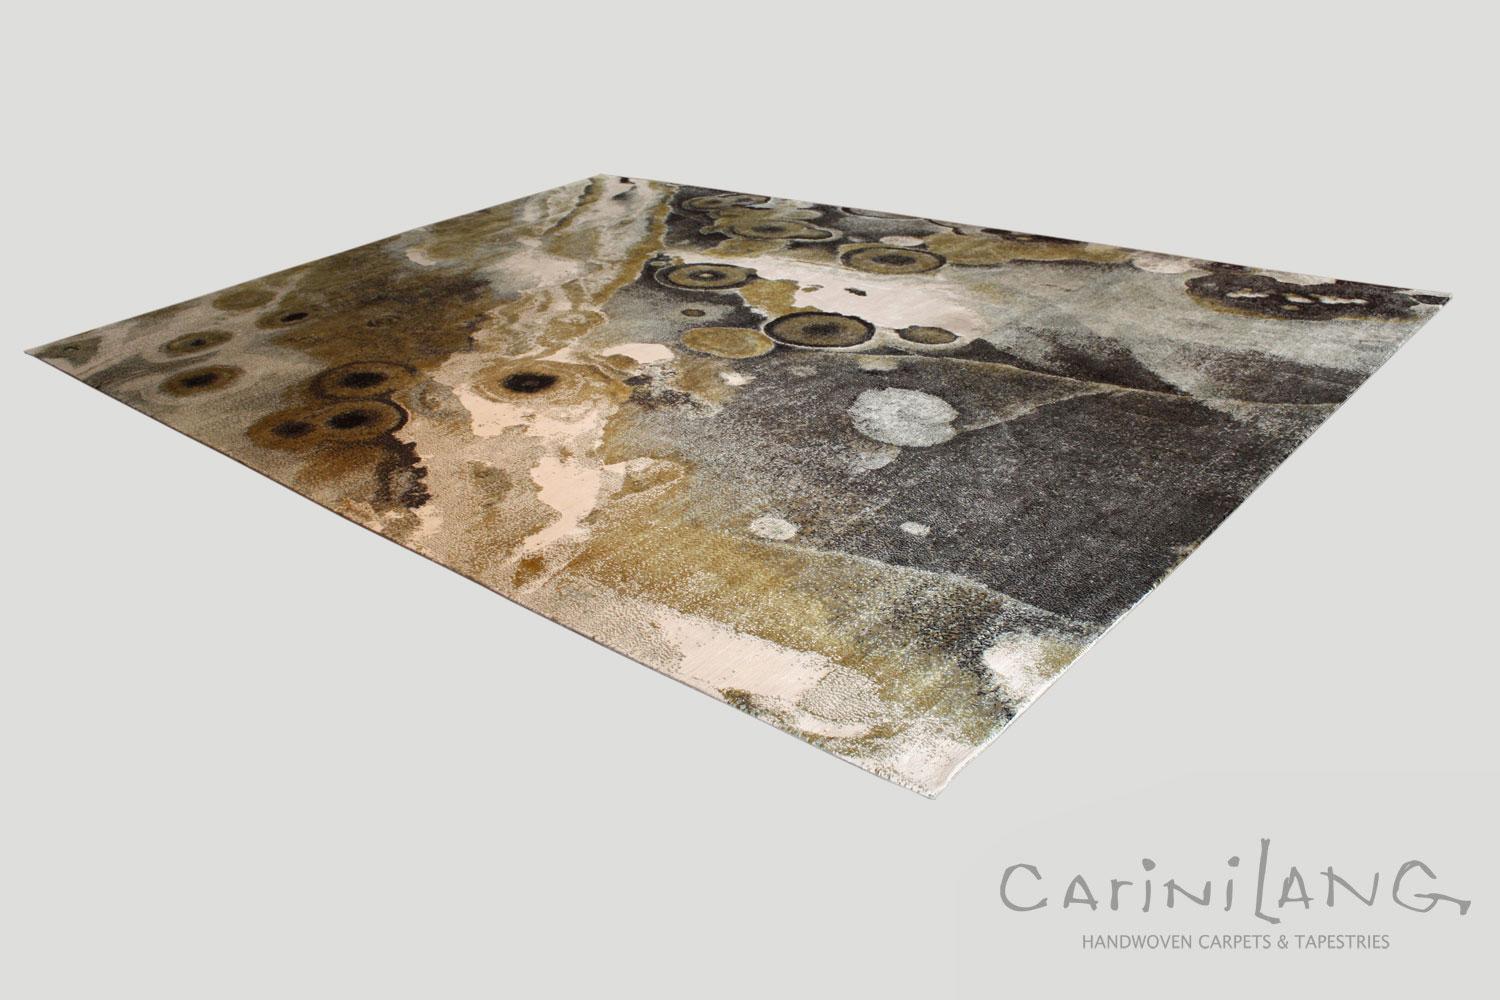 Rich tones of licorice, bourbon, and ice create the captivating balance of light and dark in Ocean Jasper. Depth and space collide in the artful complexity of this modern design by Joseph Carini. Measures:  10 x 14.